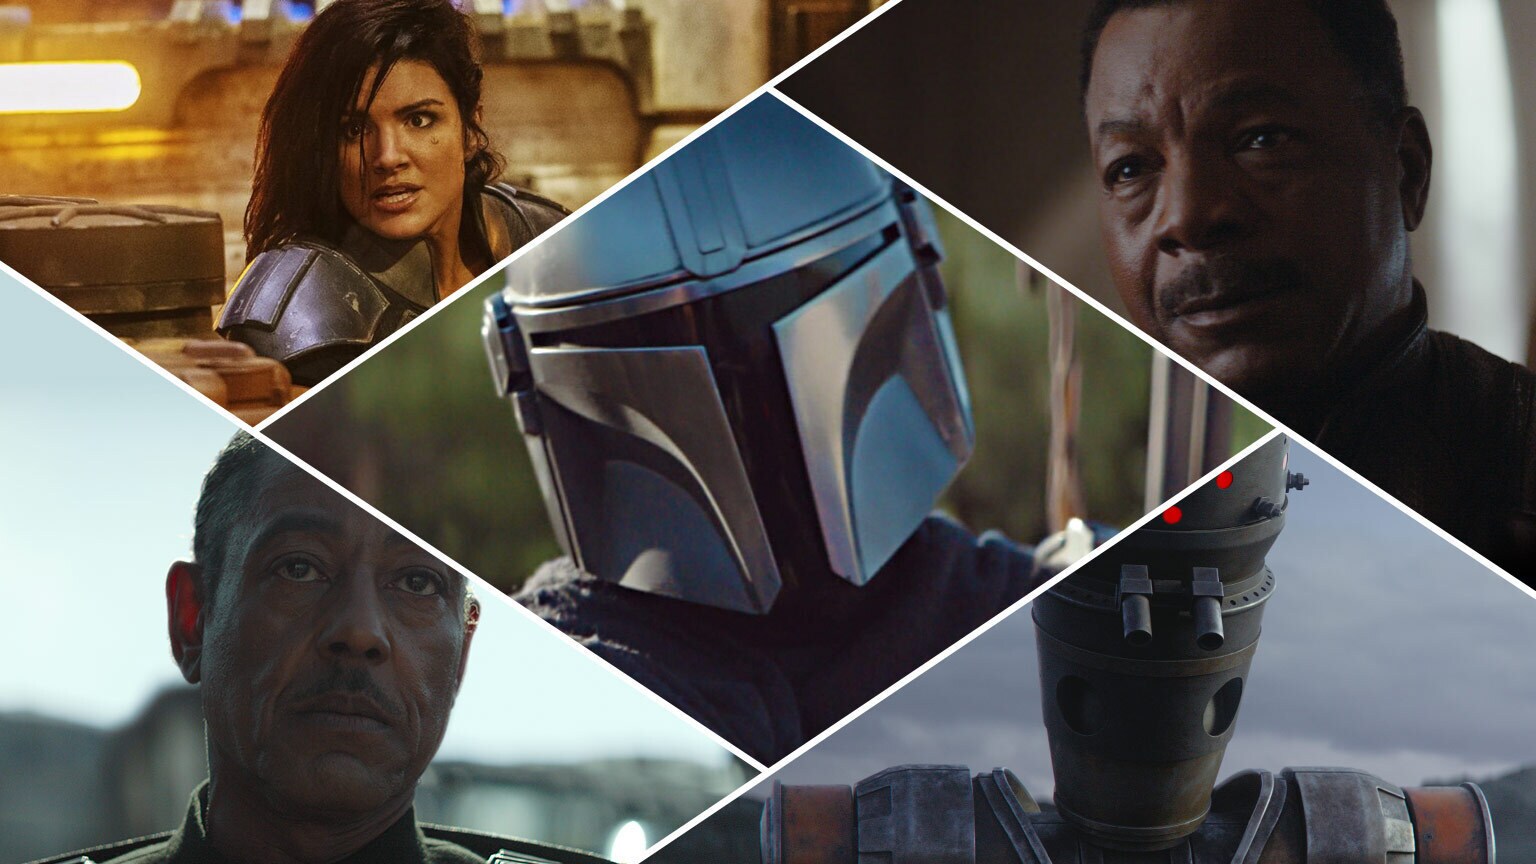 Quiz: Which Character from The Mandalorian Are You?